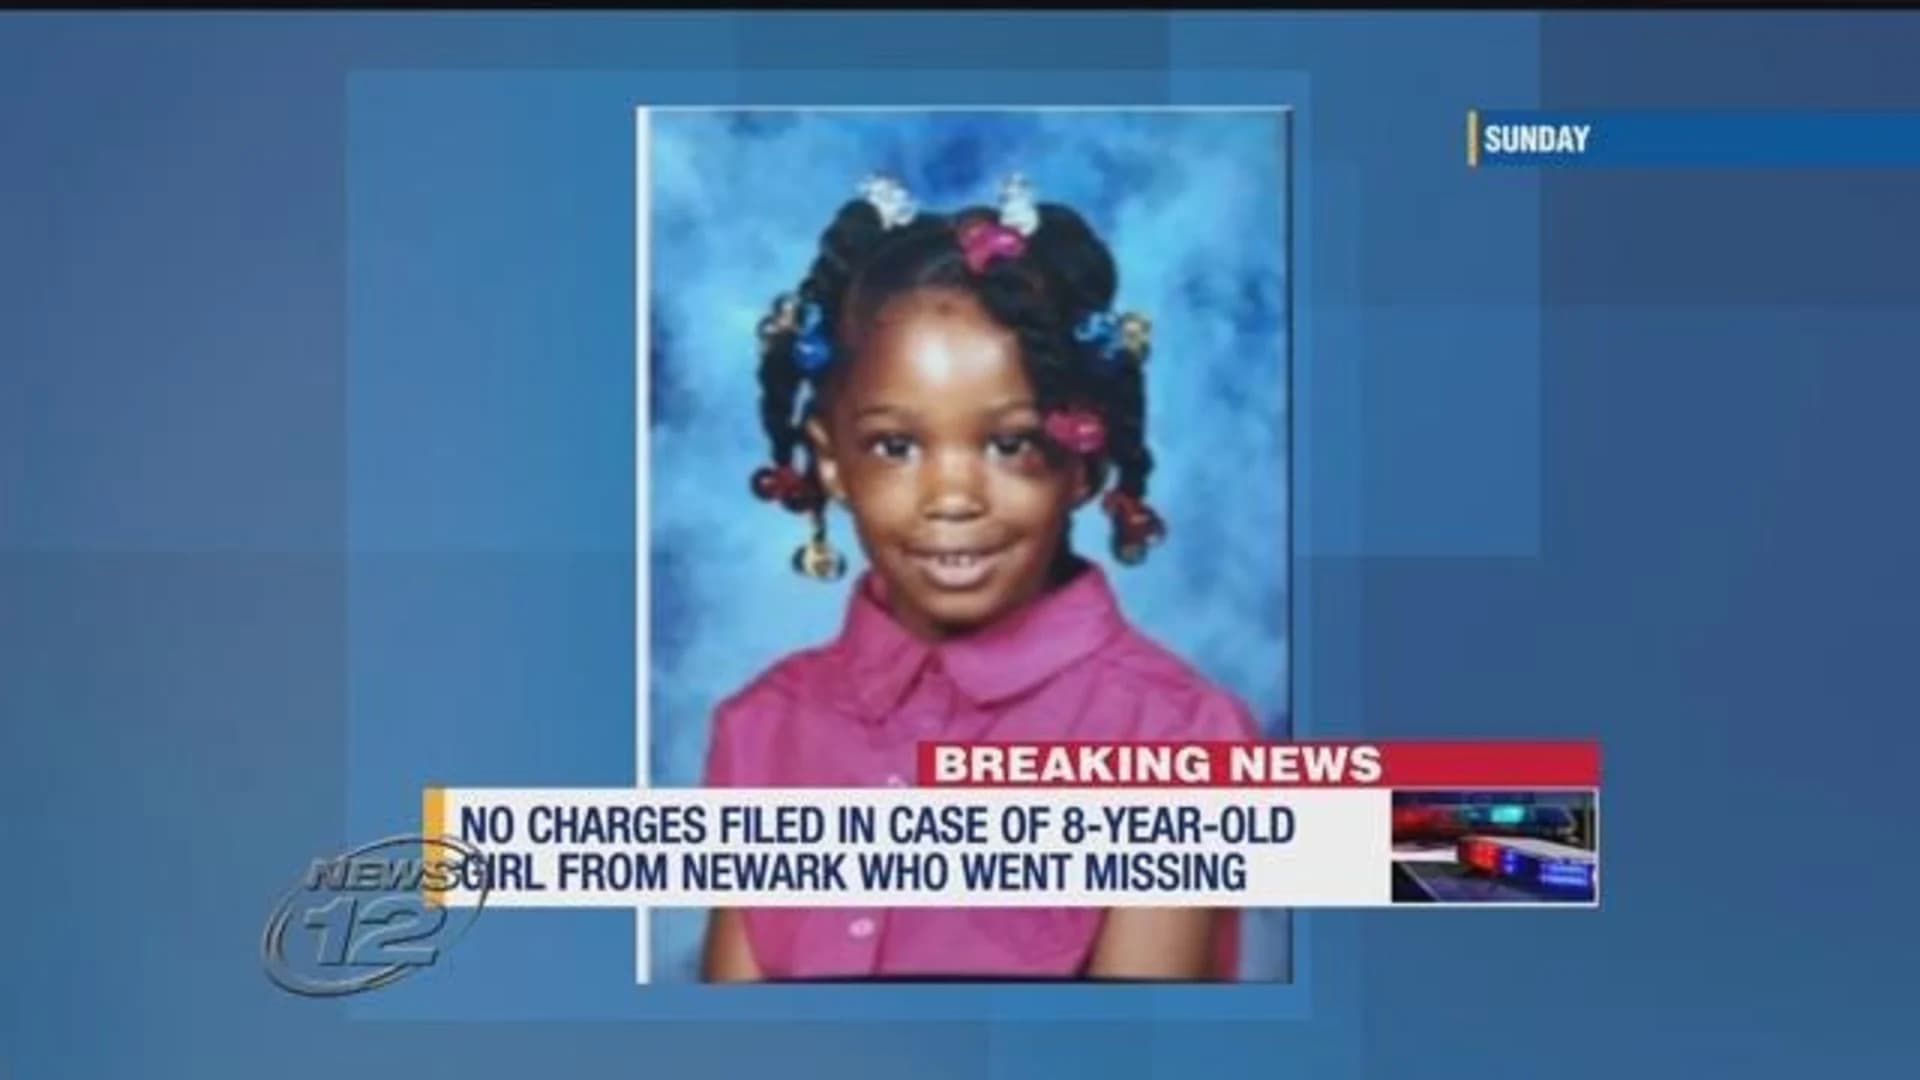 Police: No charges filed in missing child case